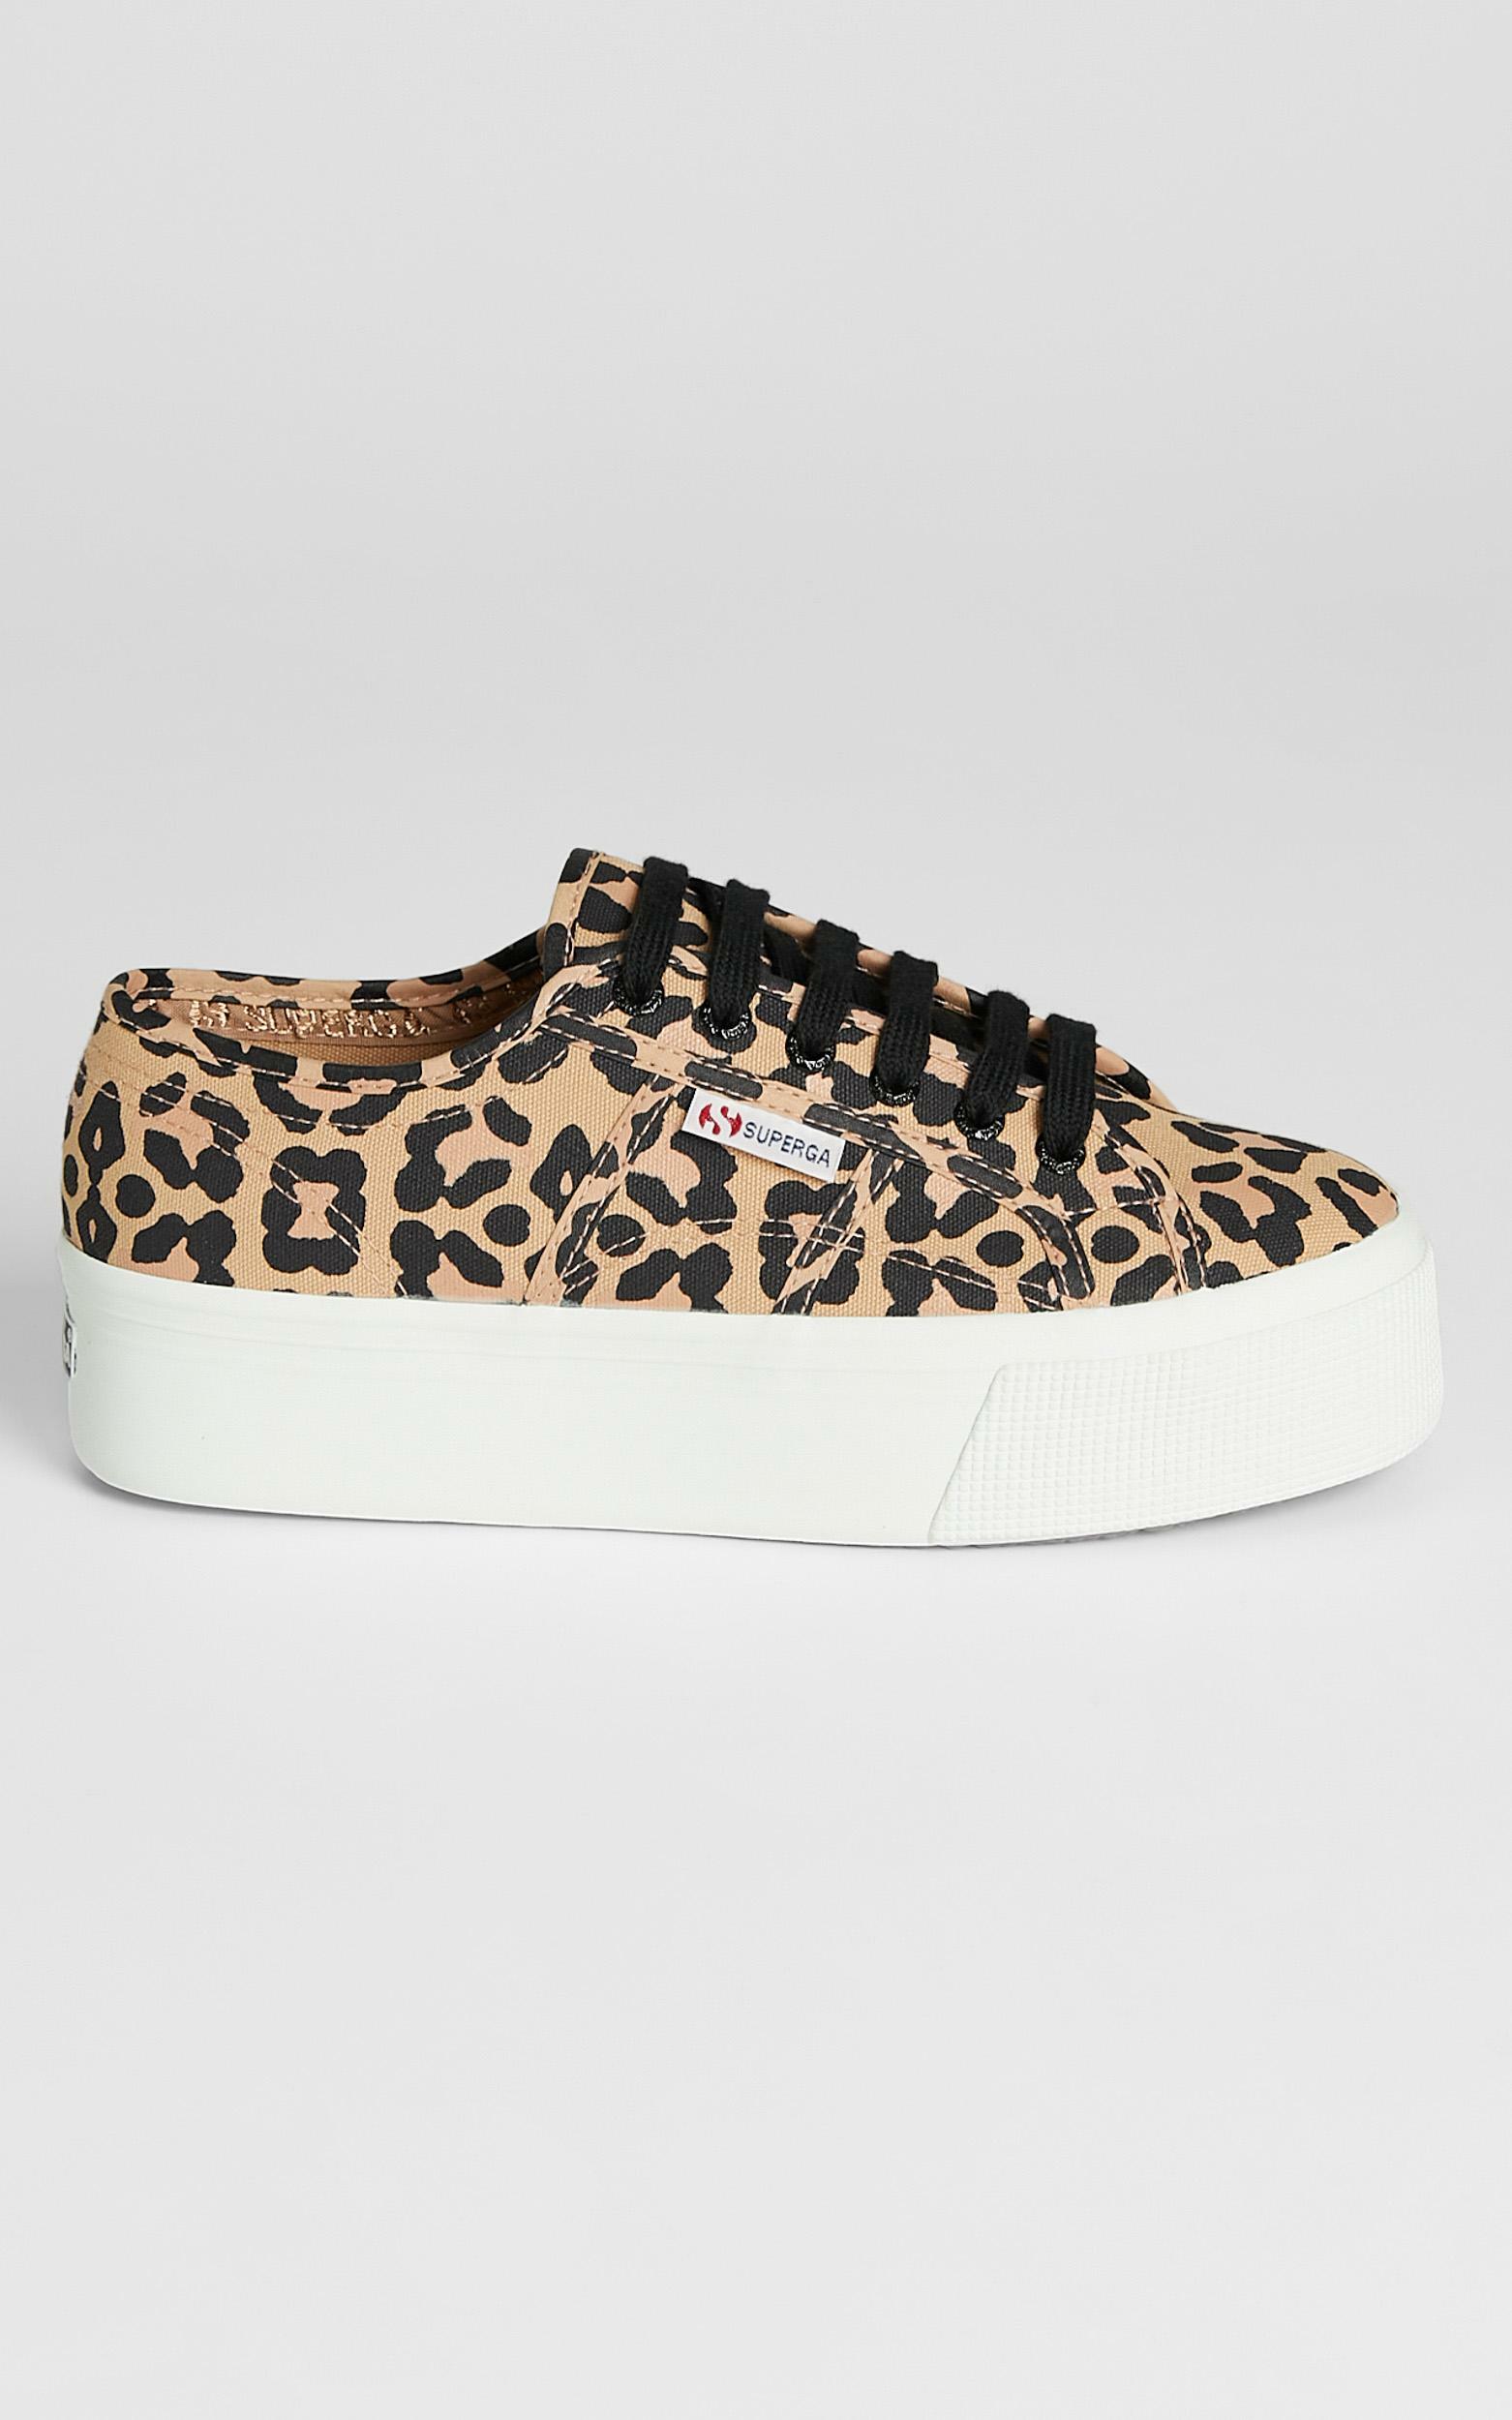 Superga - 2790 Print Sneakers in A4H Classic Leopard - 05, BRN1, hi-res image number null